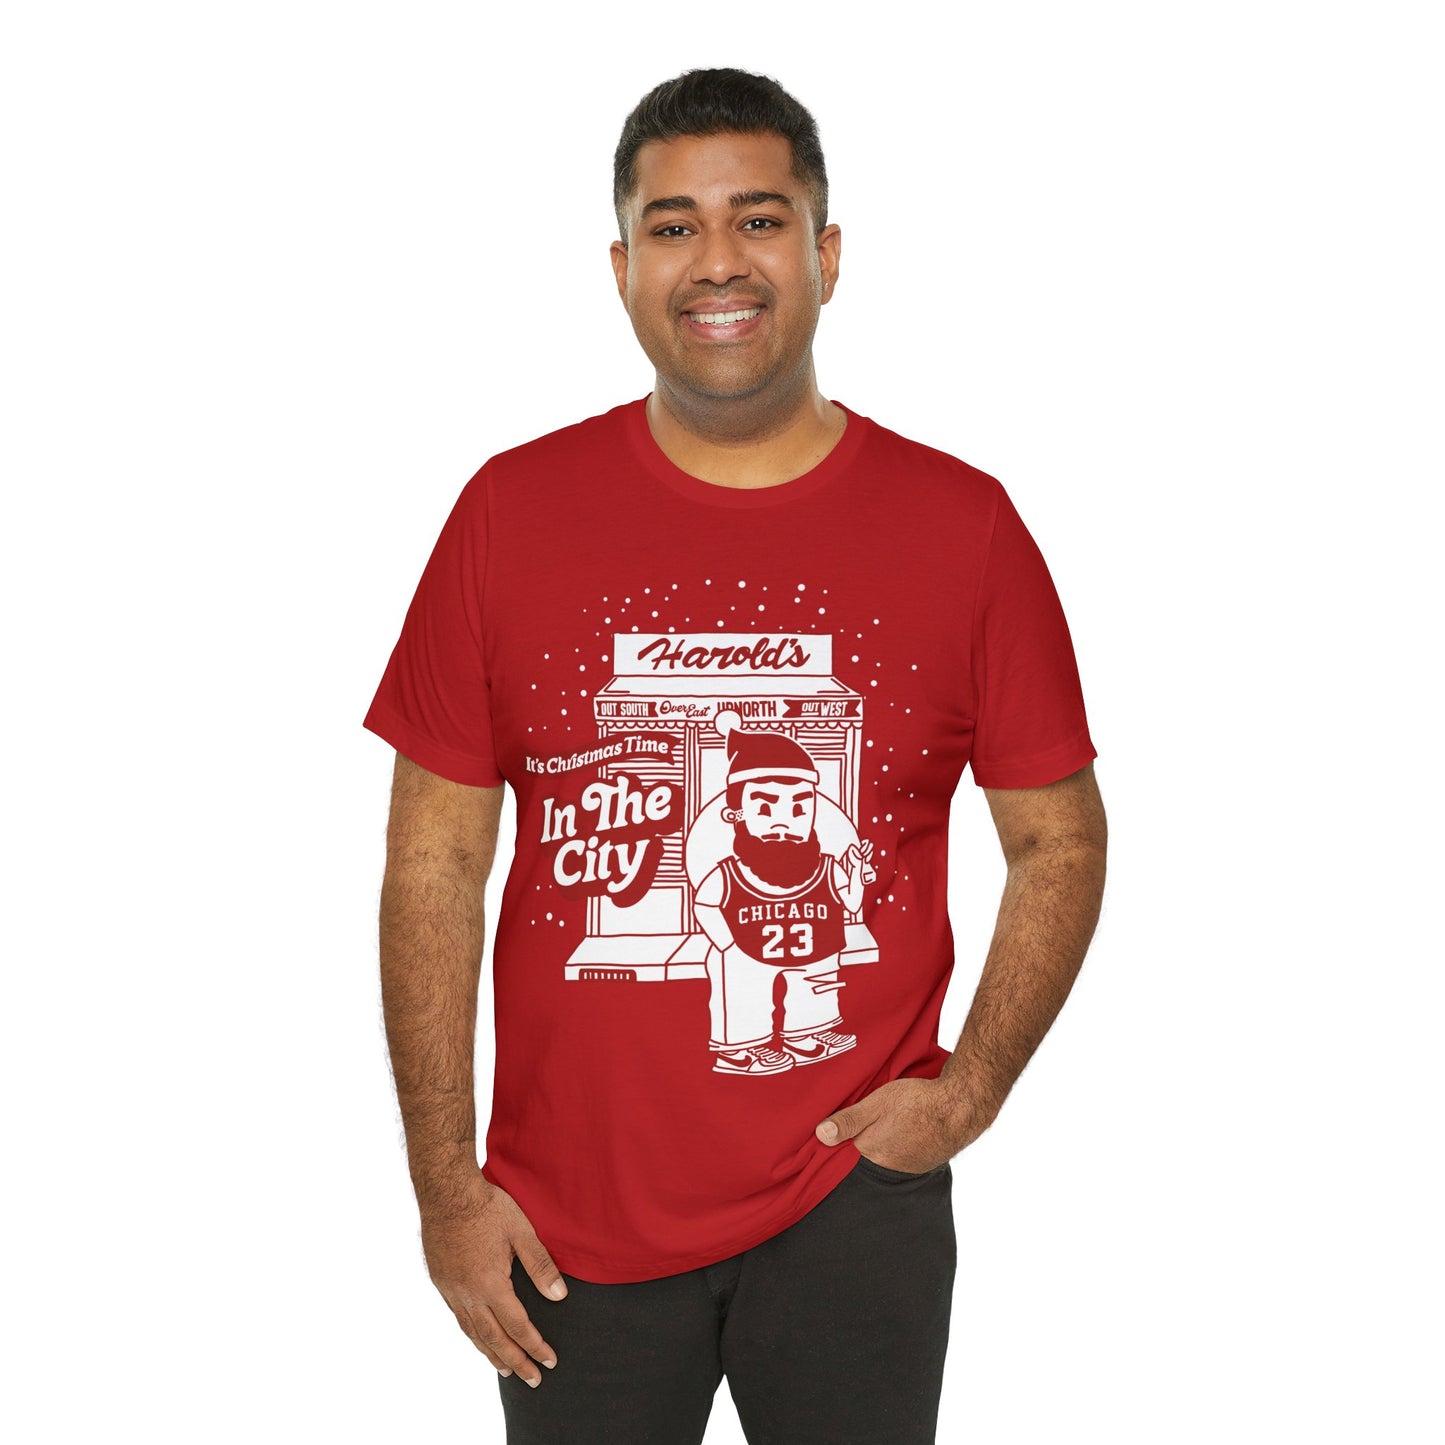 Christmas in Chicago Shirt | Christmas in Chicago